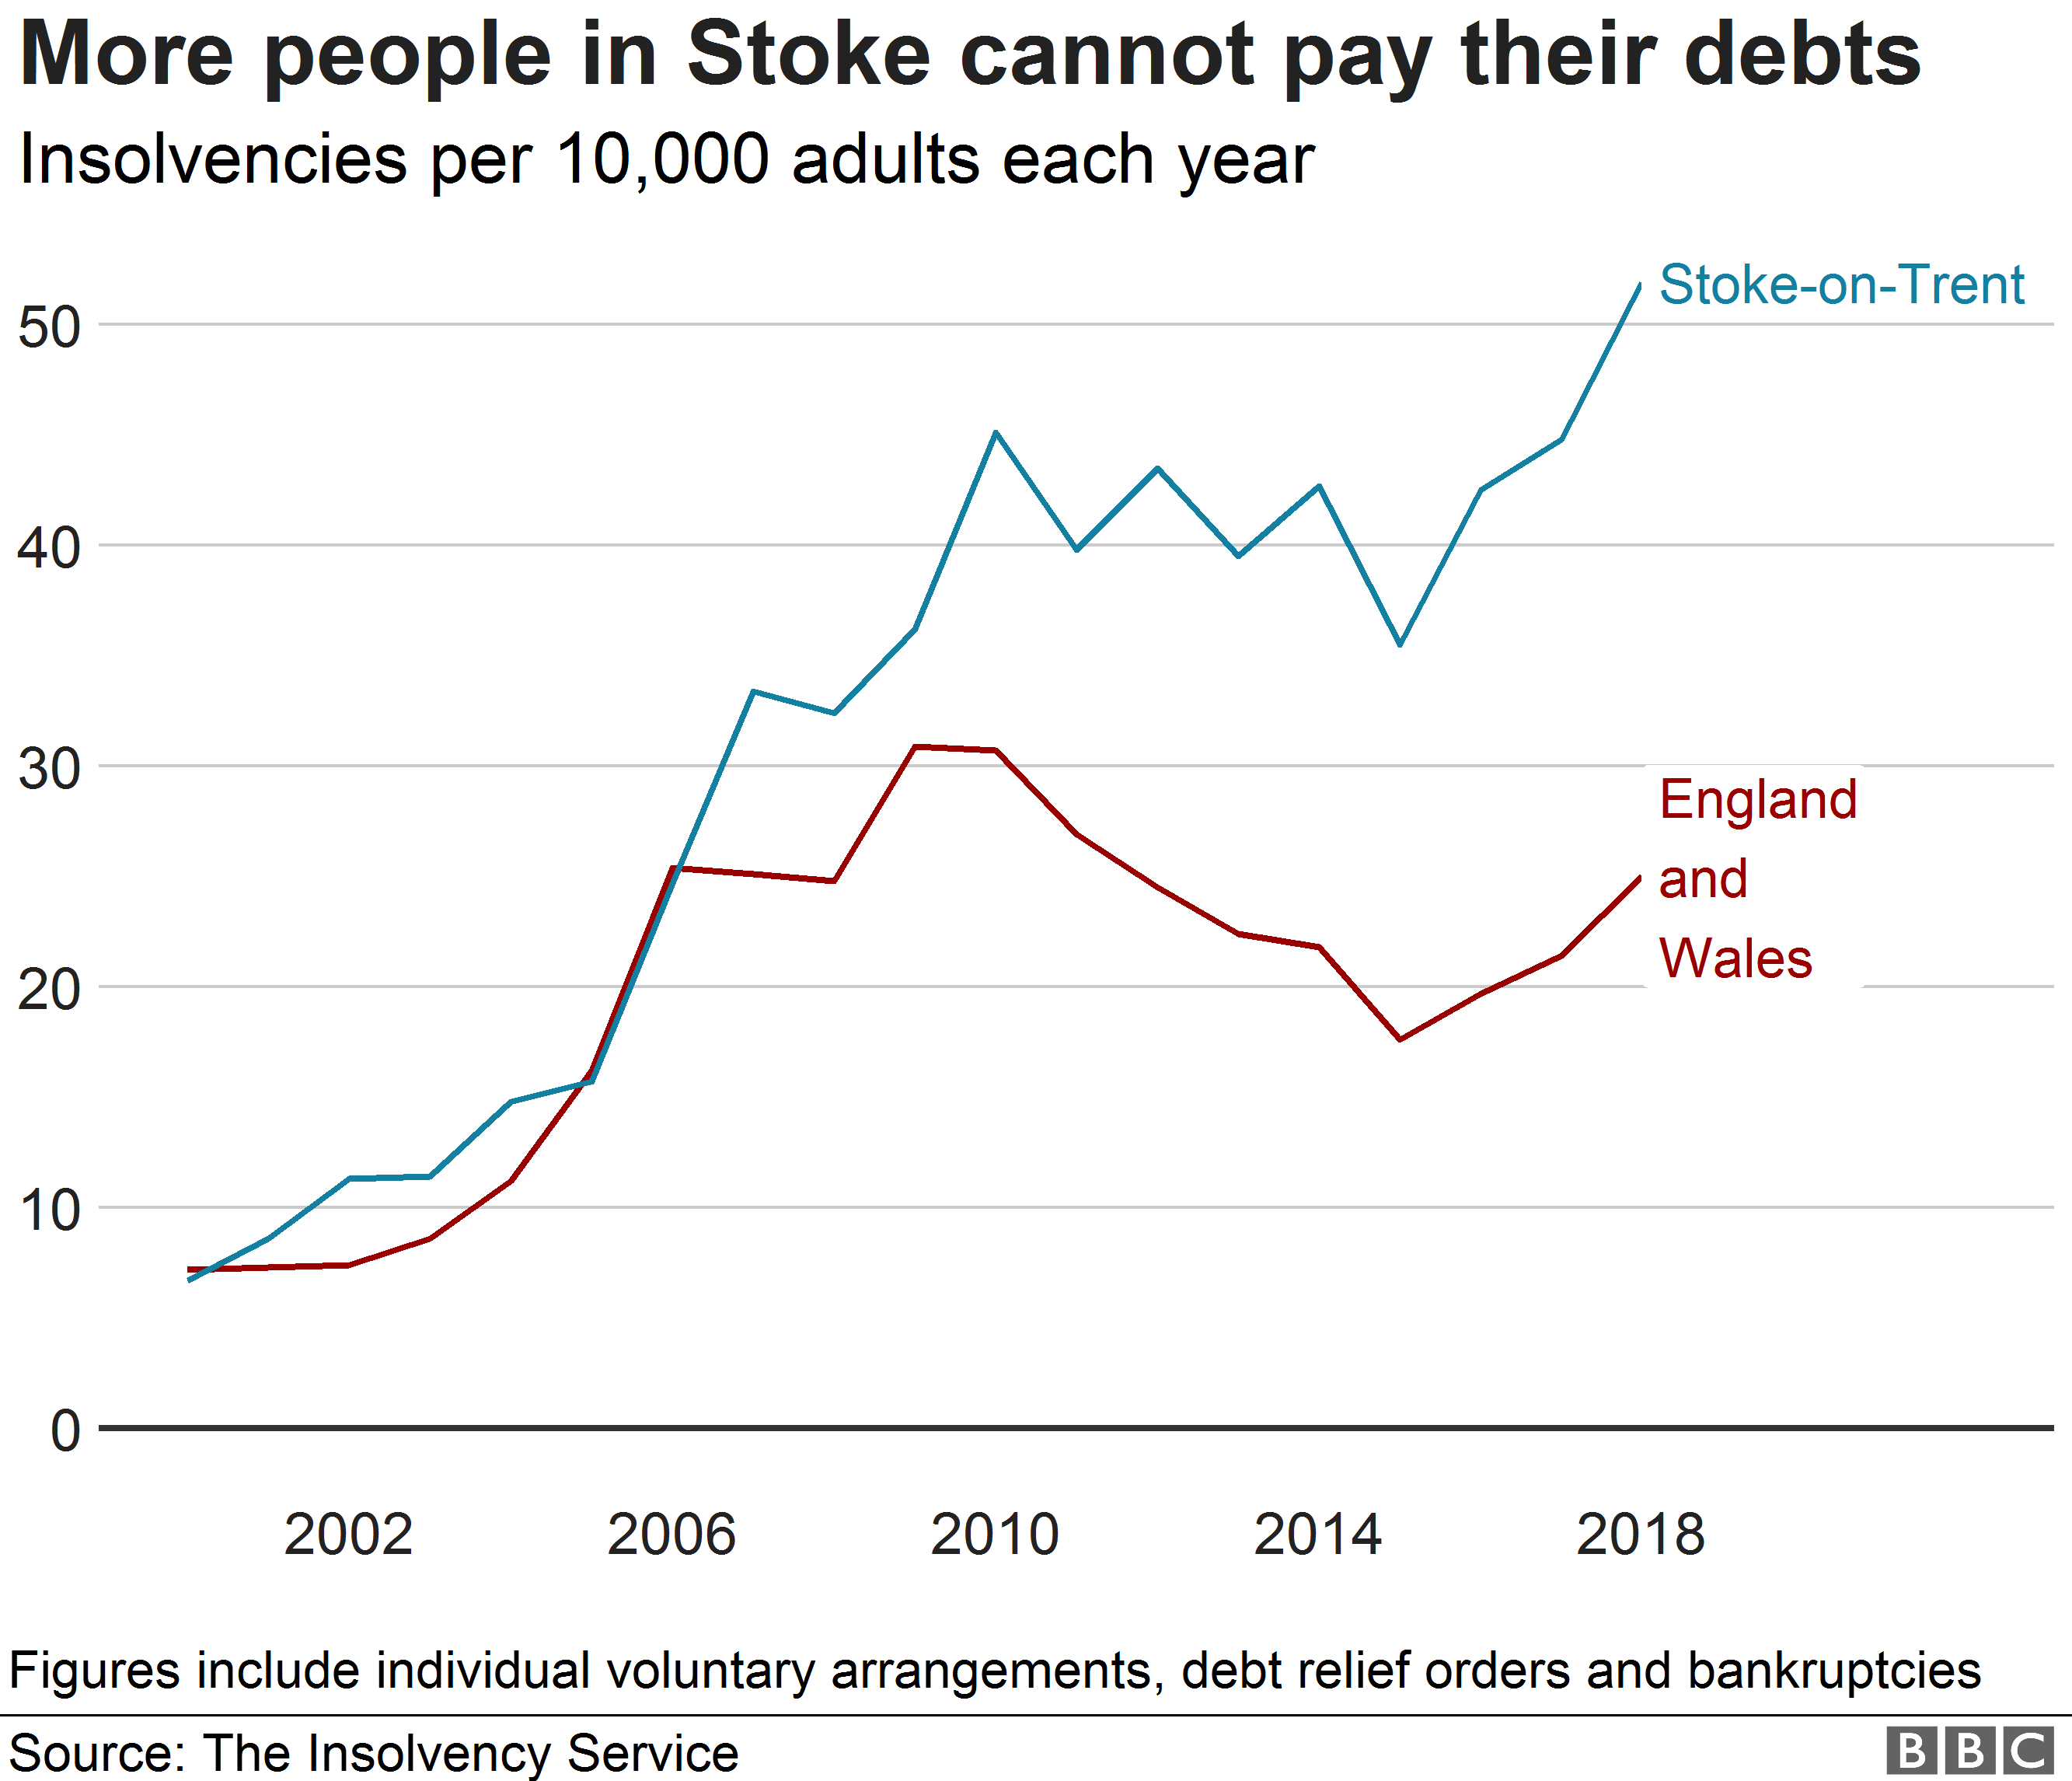 Chart showing insolvency in Stoke on Trent and the rest of England and Wales